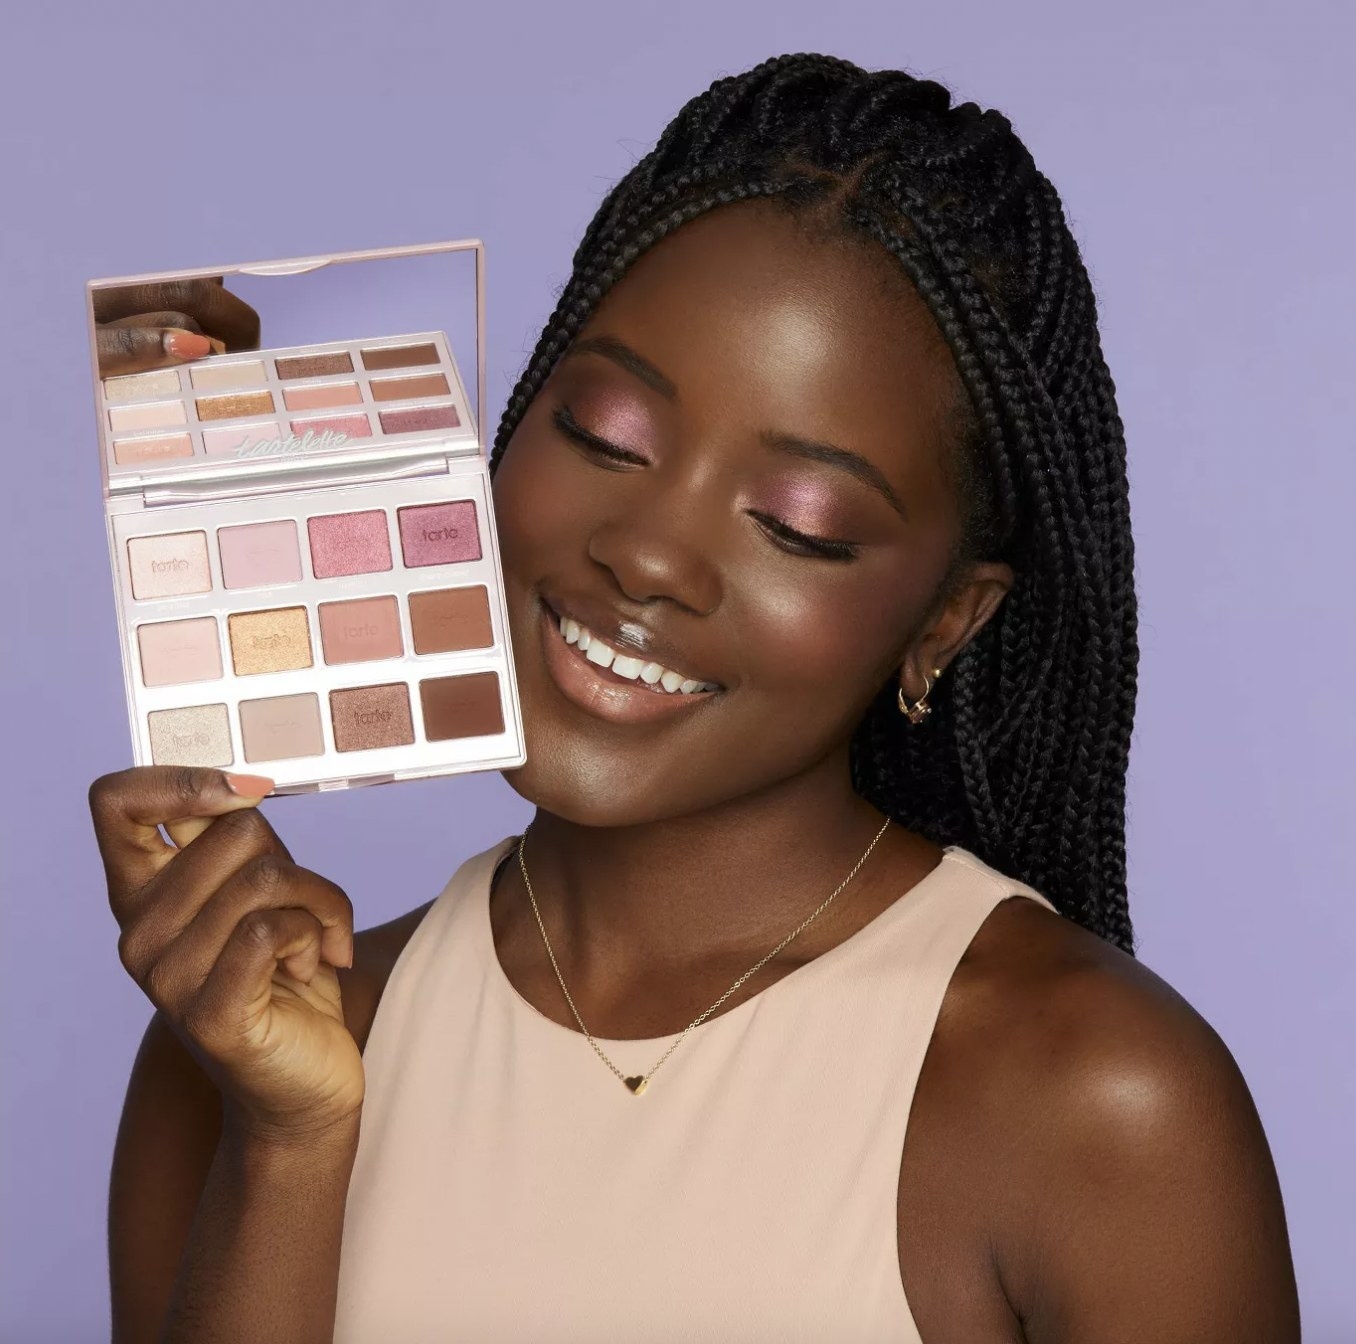 A person holding an eyeshadow palette